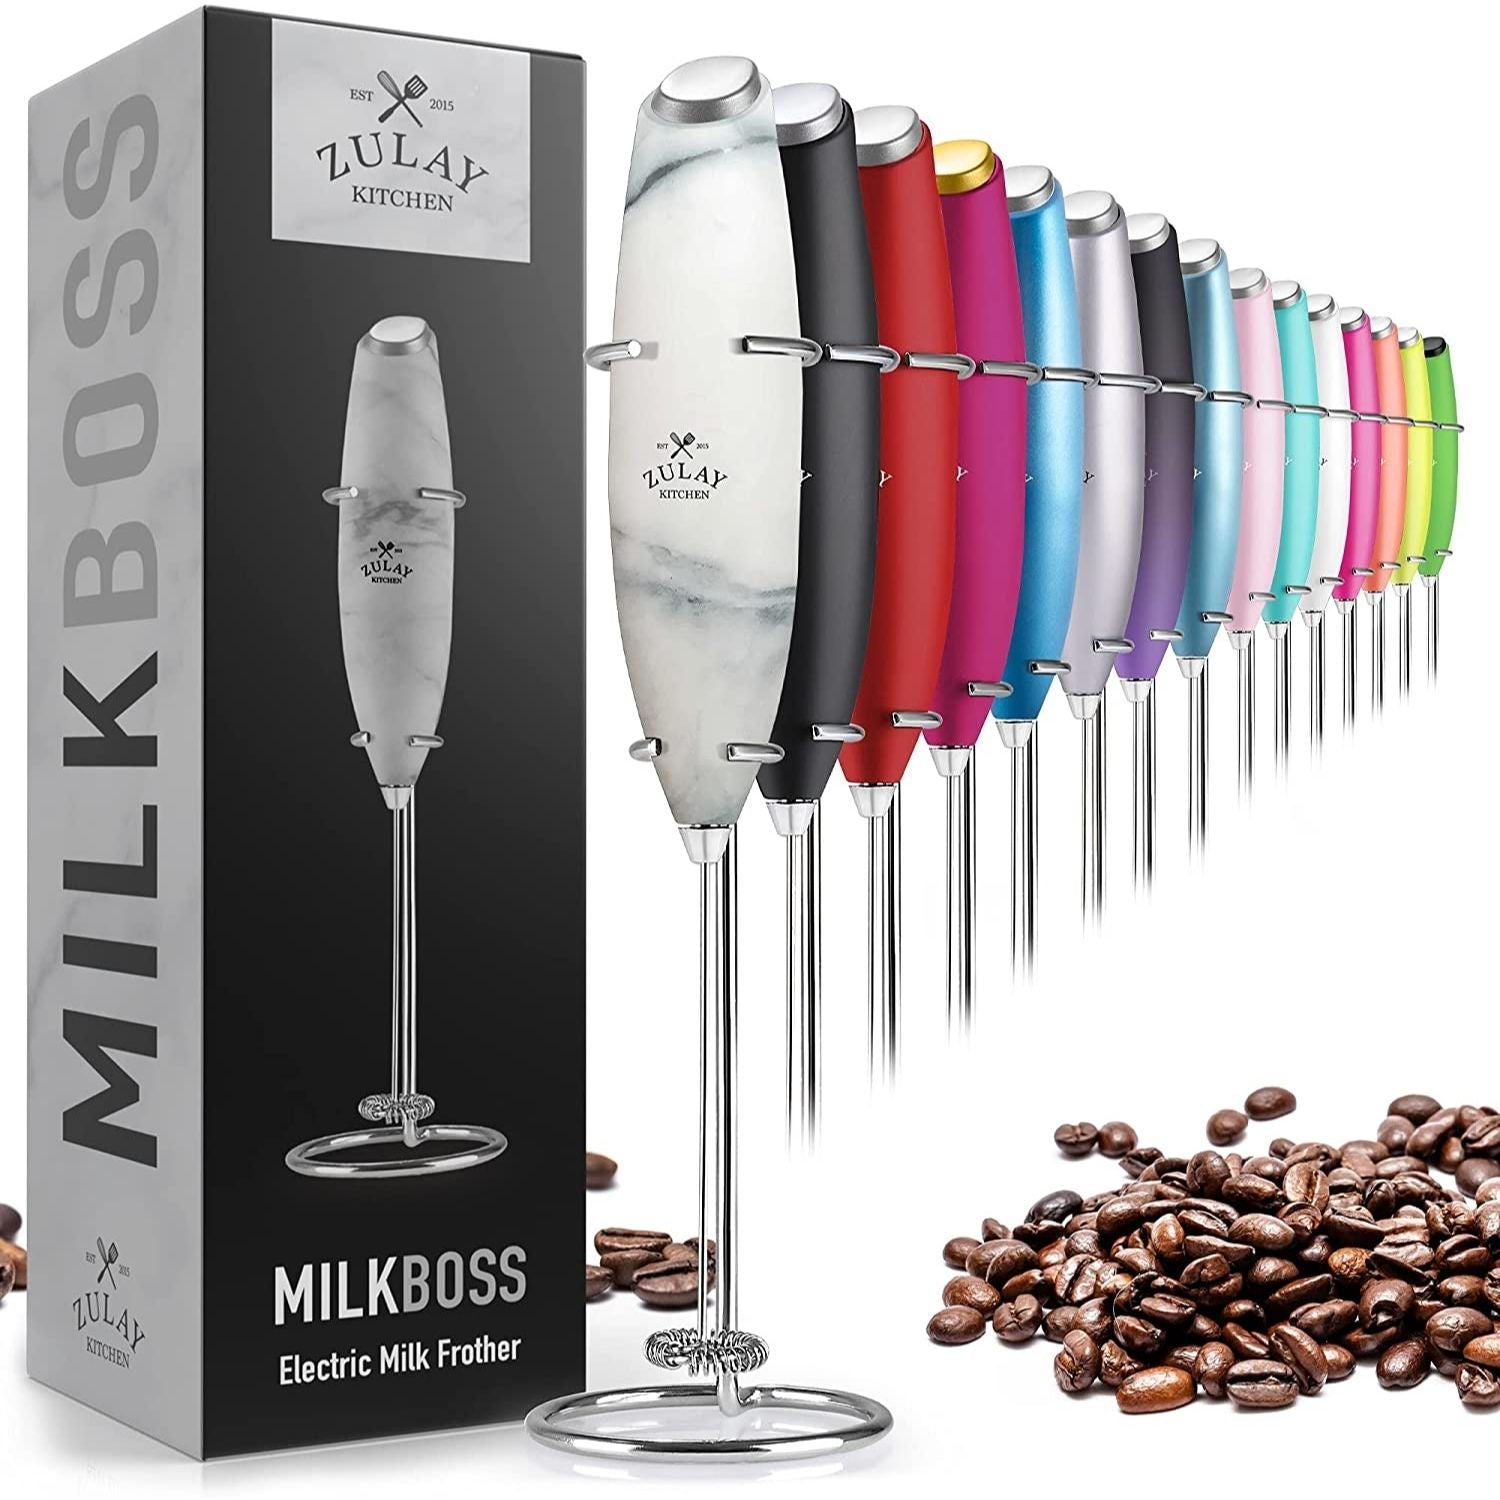 Zulay Kitchen Milk Boss Electric Milk Frother. B22